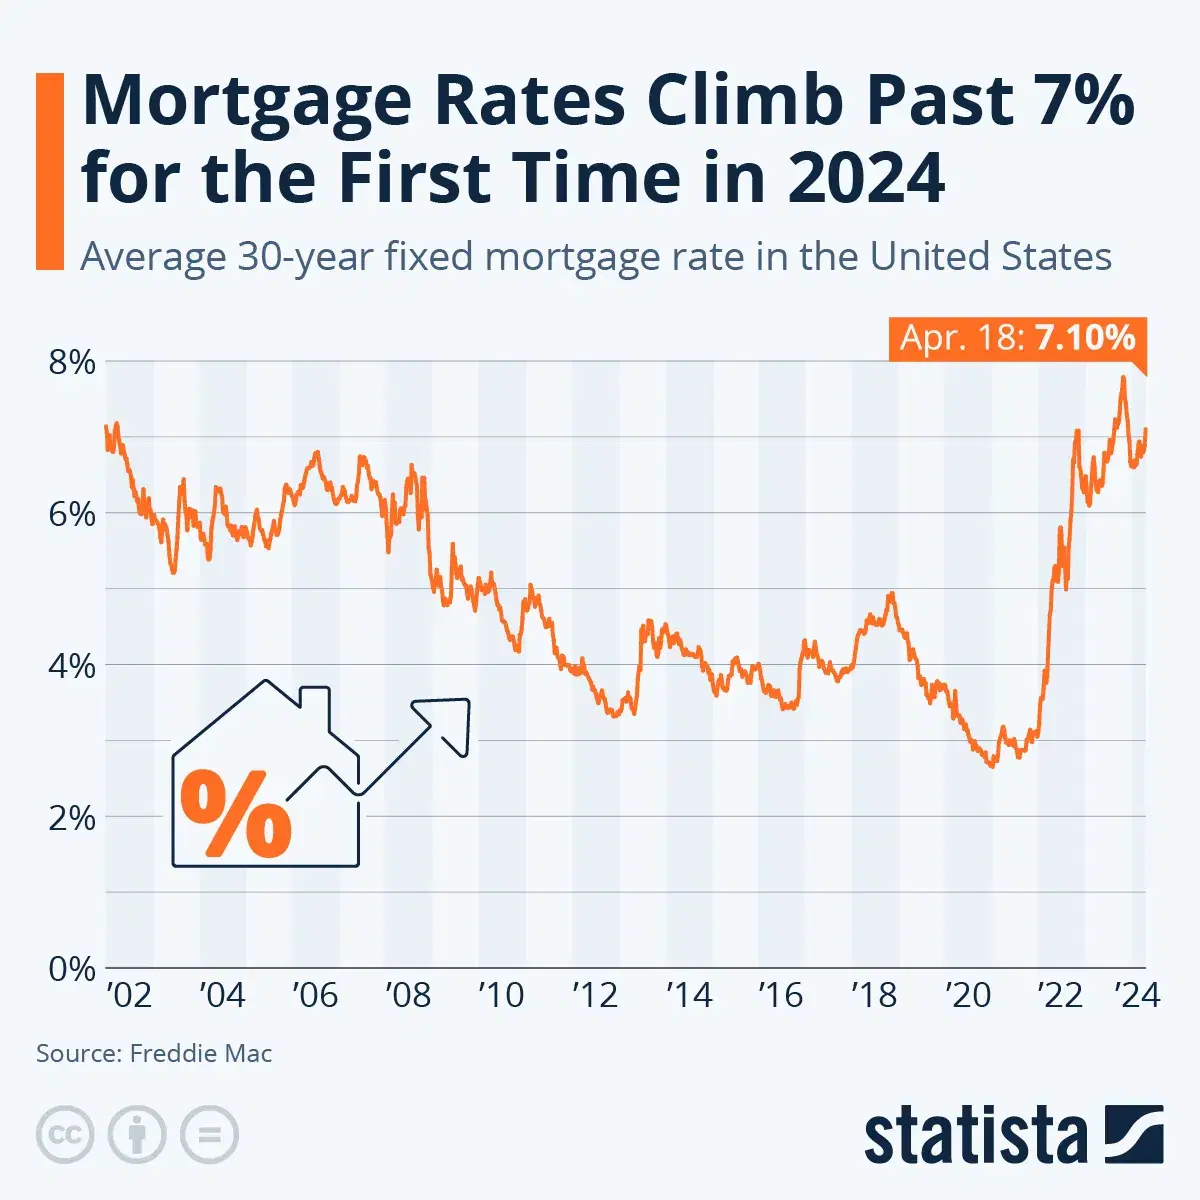 Mortgage Rates Climb Past 7% for the First Time in 2024